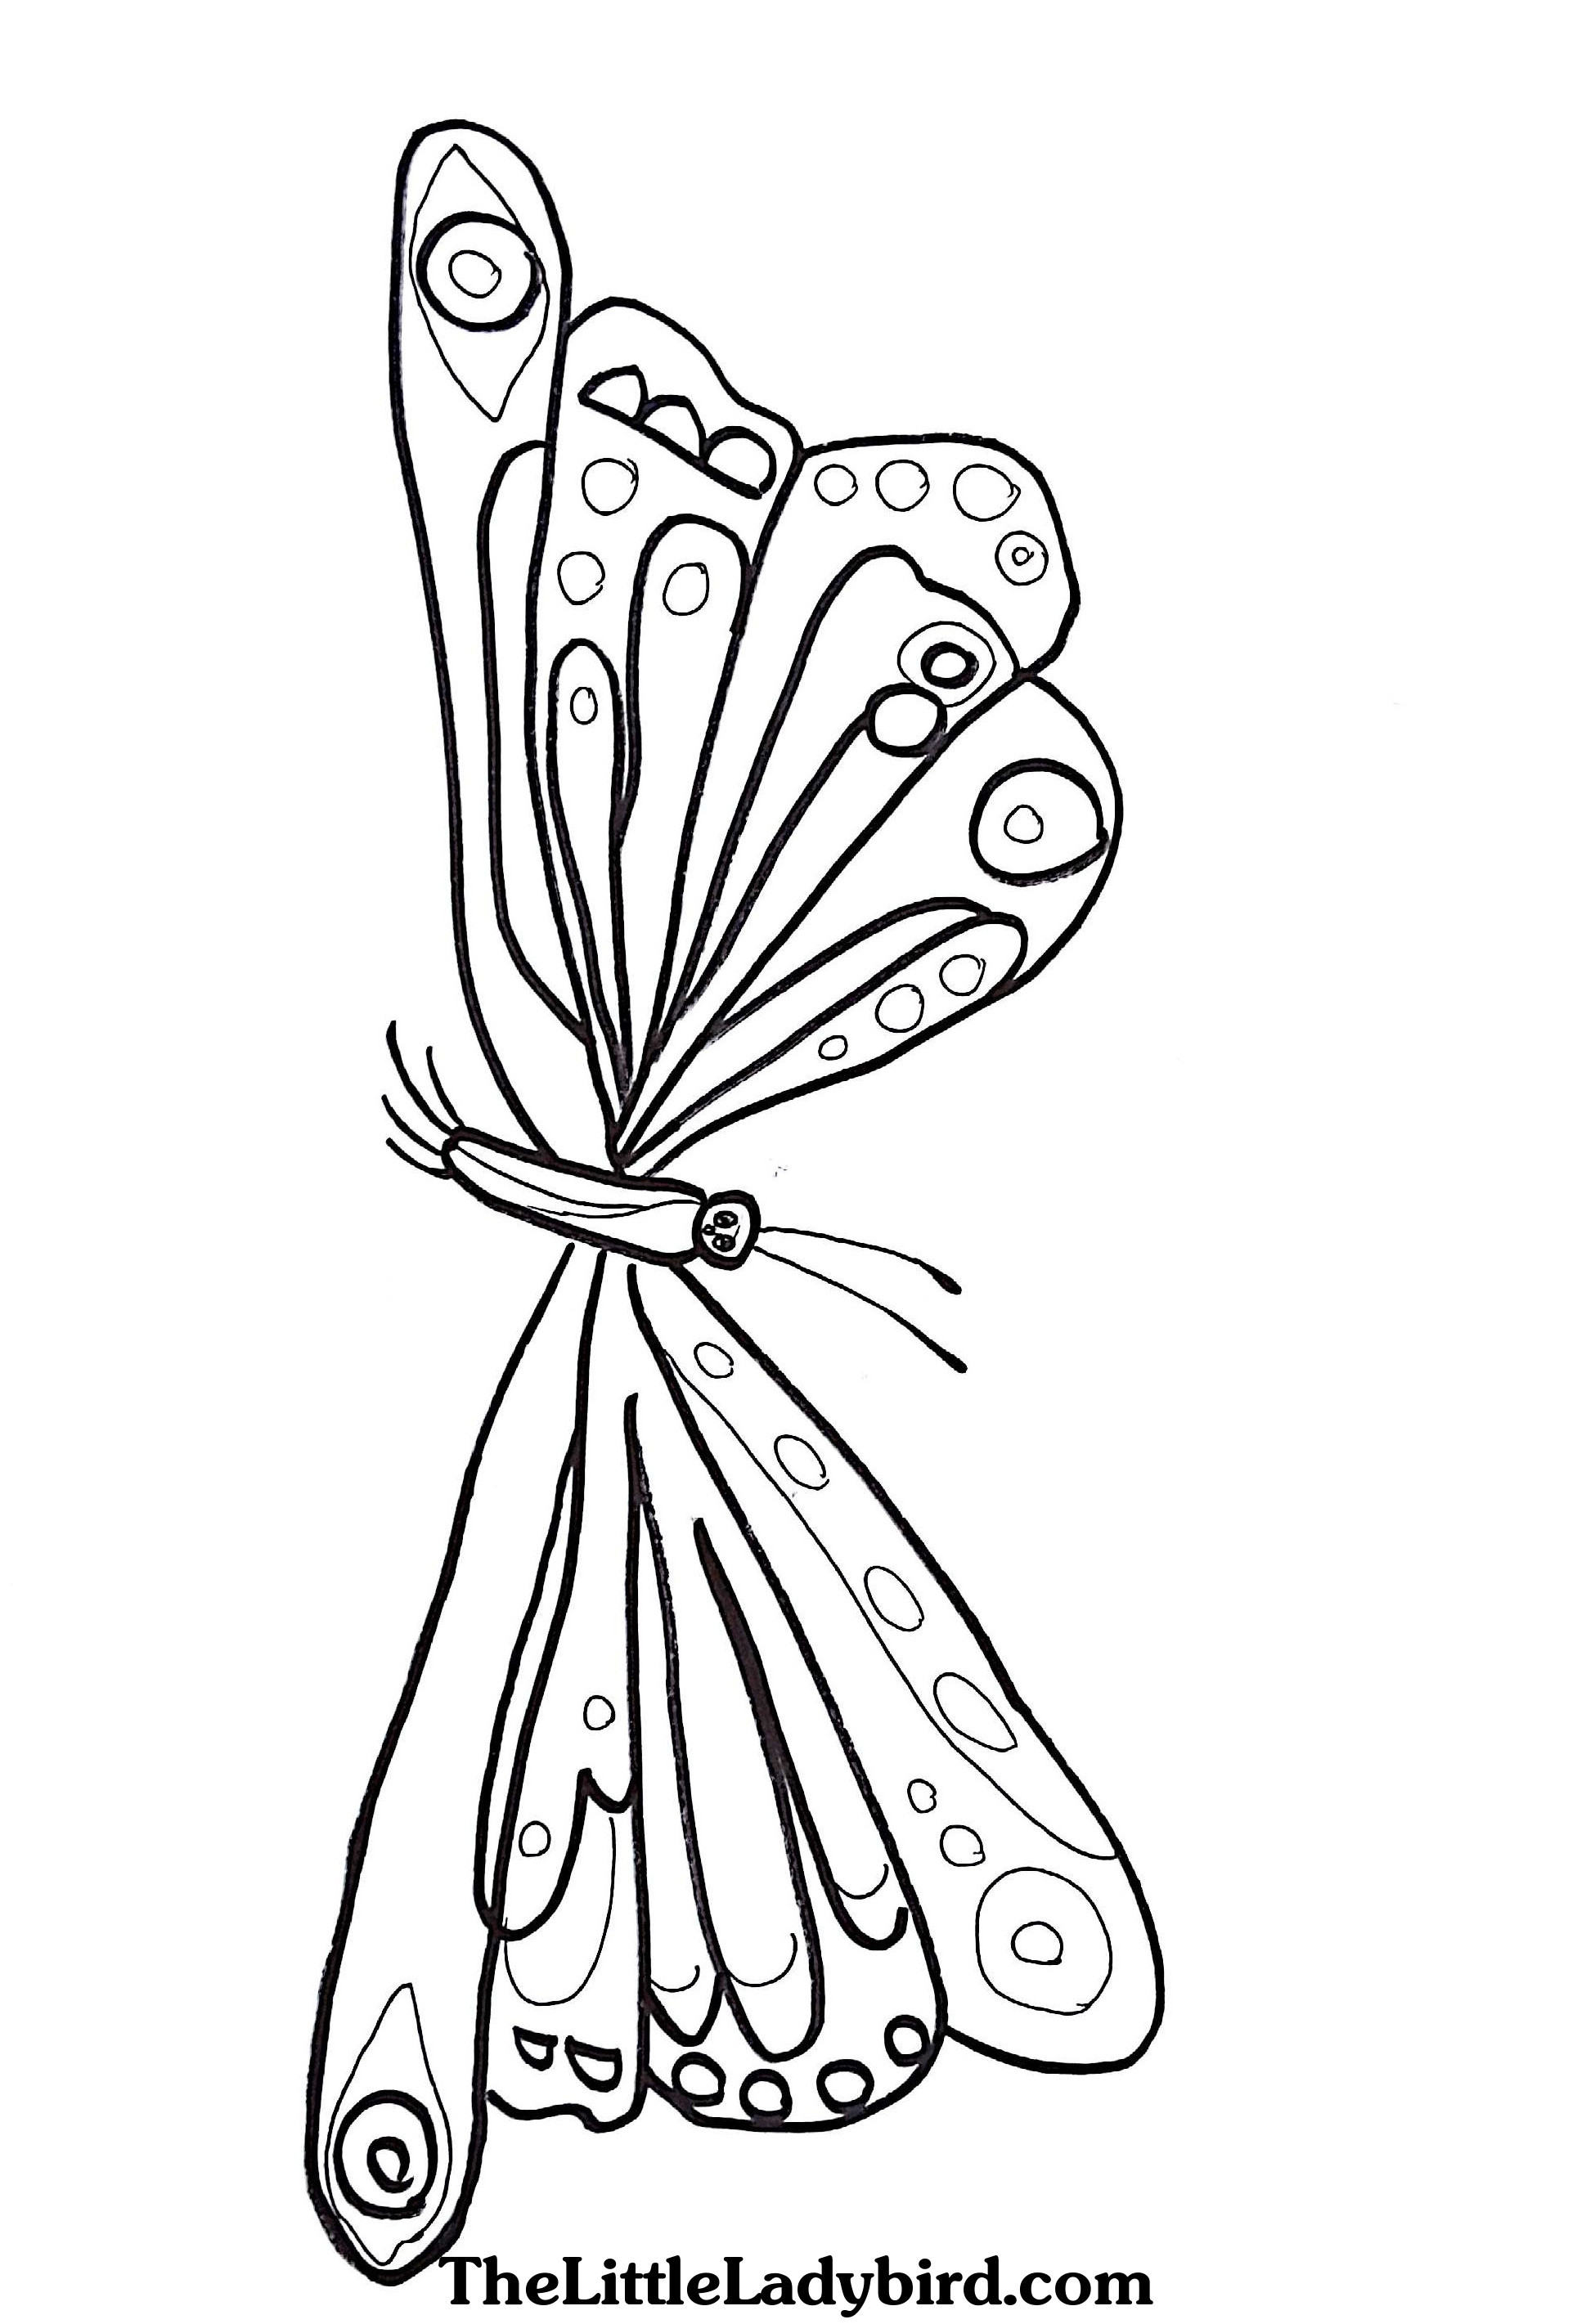 25+ Awesome Picture of Hungry Caterpillar Coloring Pages